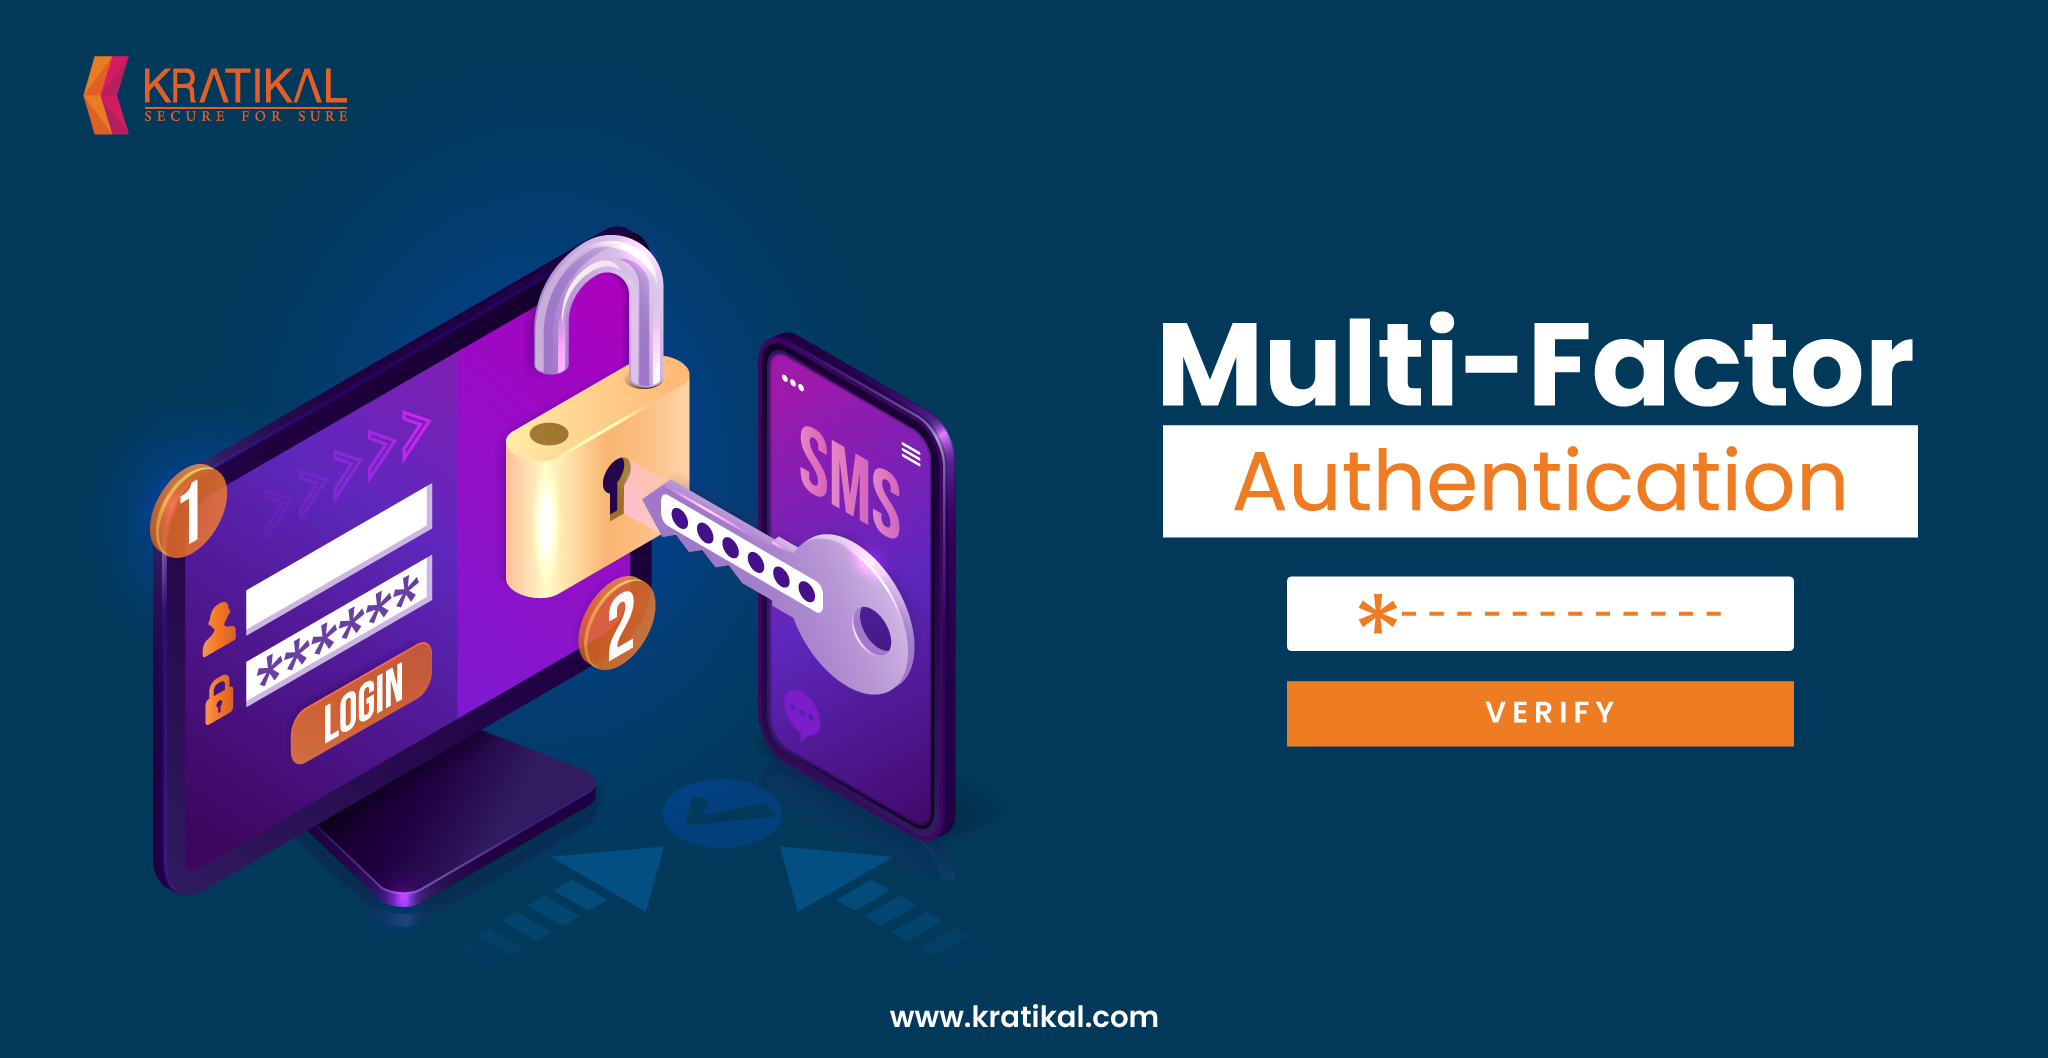 Multi-Factor Authentication can prevent of account compromise threats.